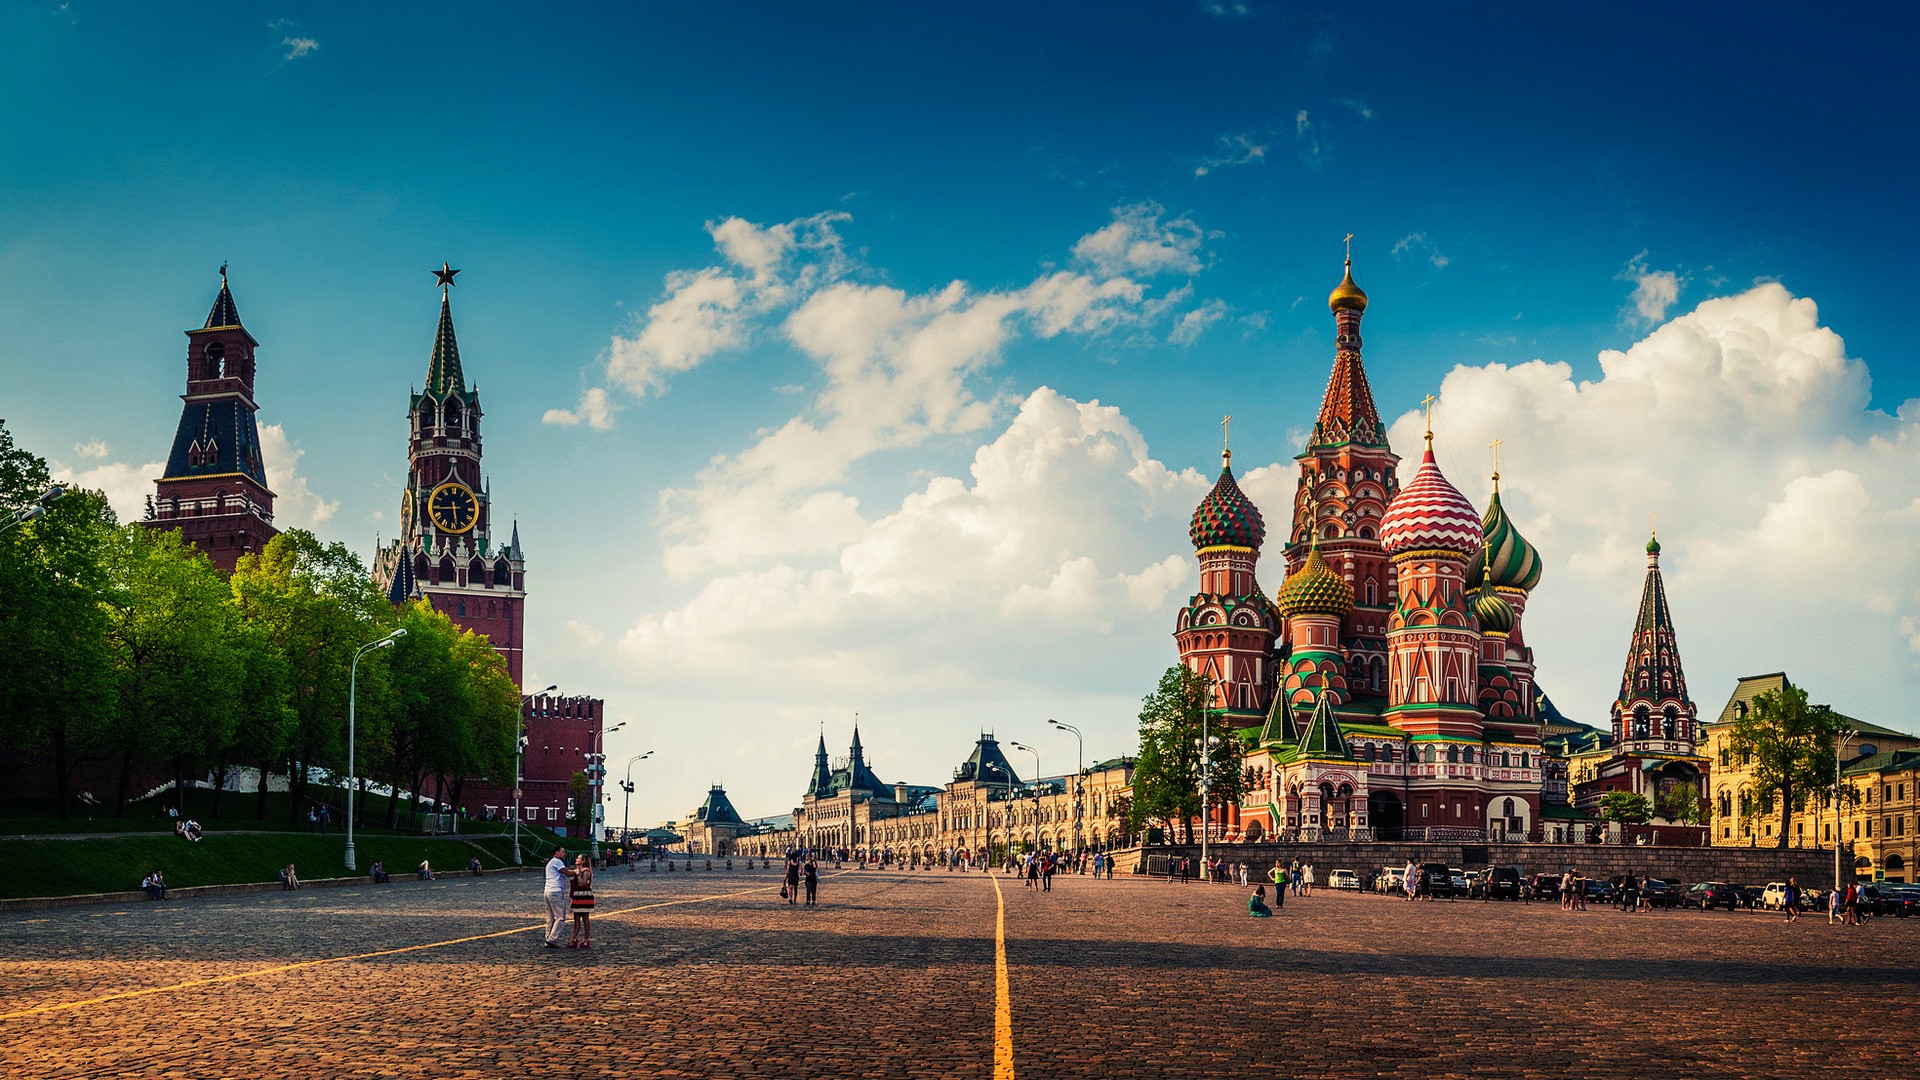 cityscape, Architecture, City, Building, Urban, Moscow, Russia, Kremlin, Town square, Cathedral, Old building, People, Street, Trees, Clouds, Clock towers, Red Square, Pavers, Capital Wallpaper